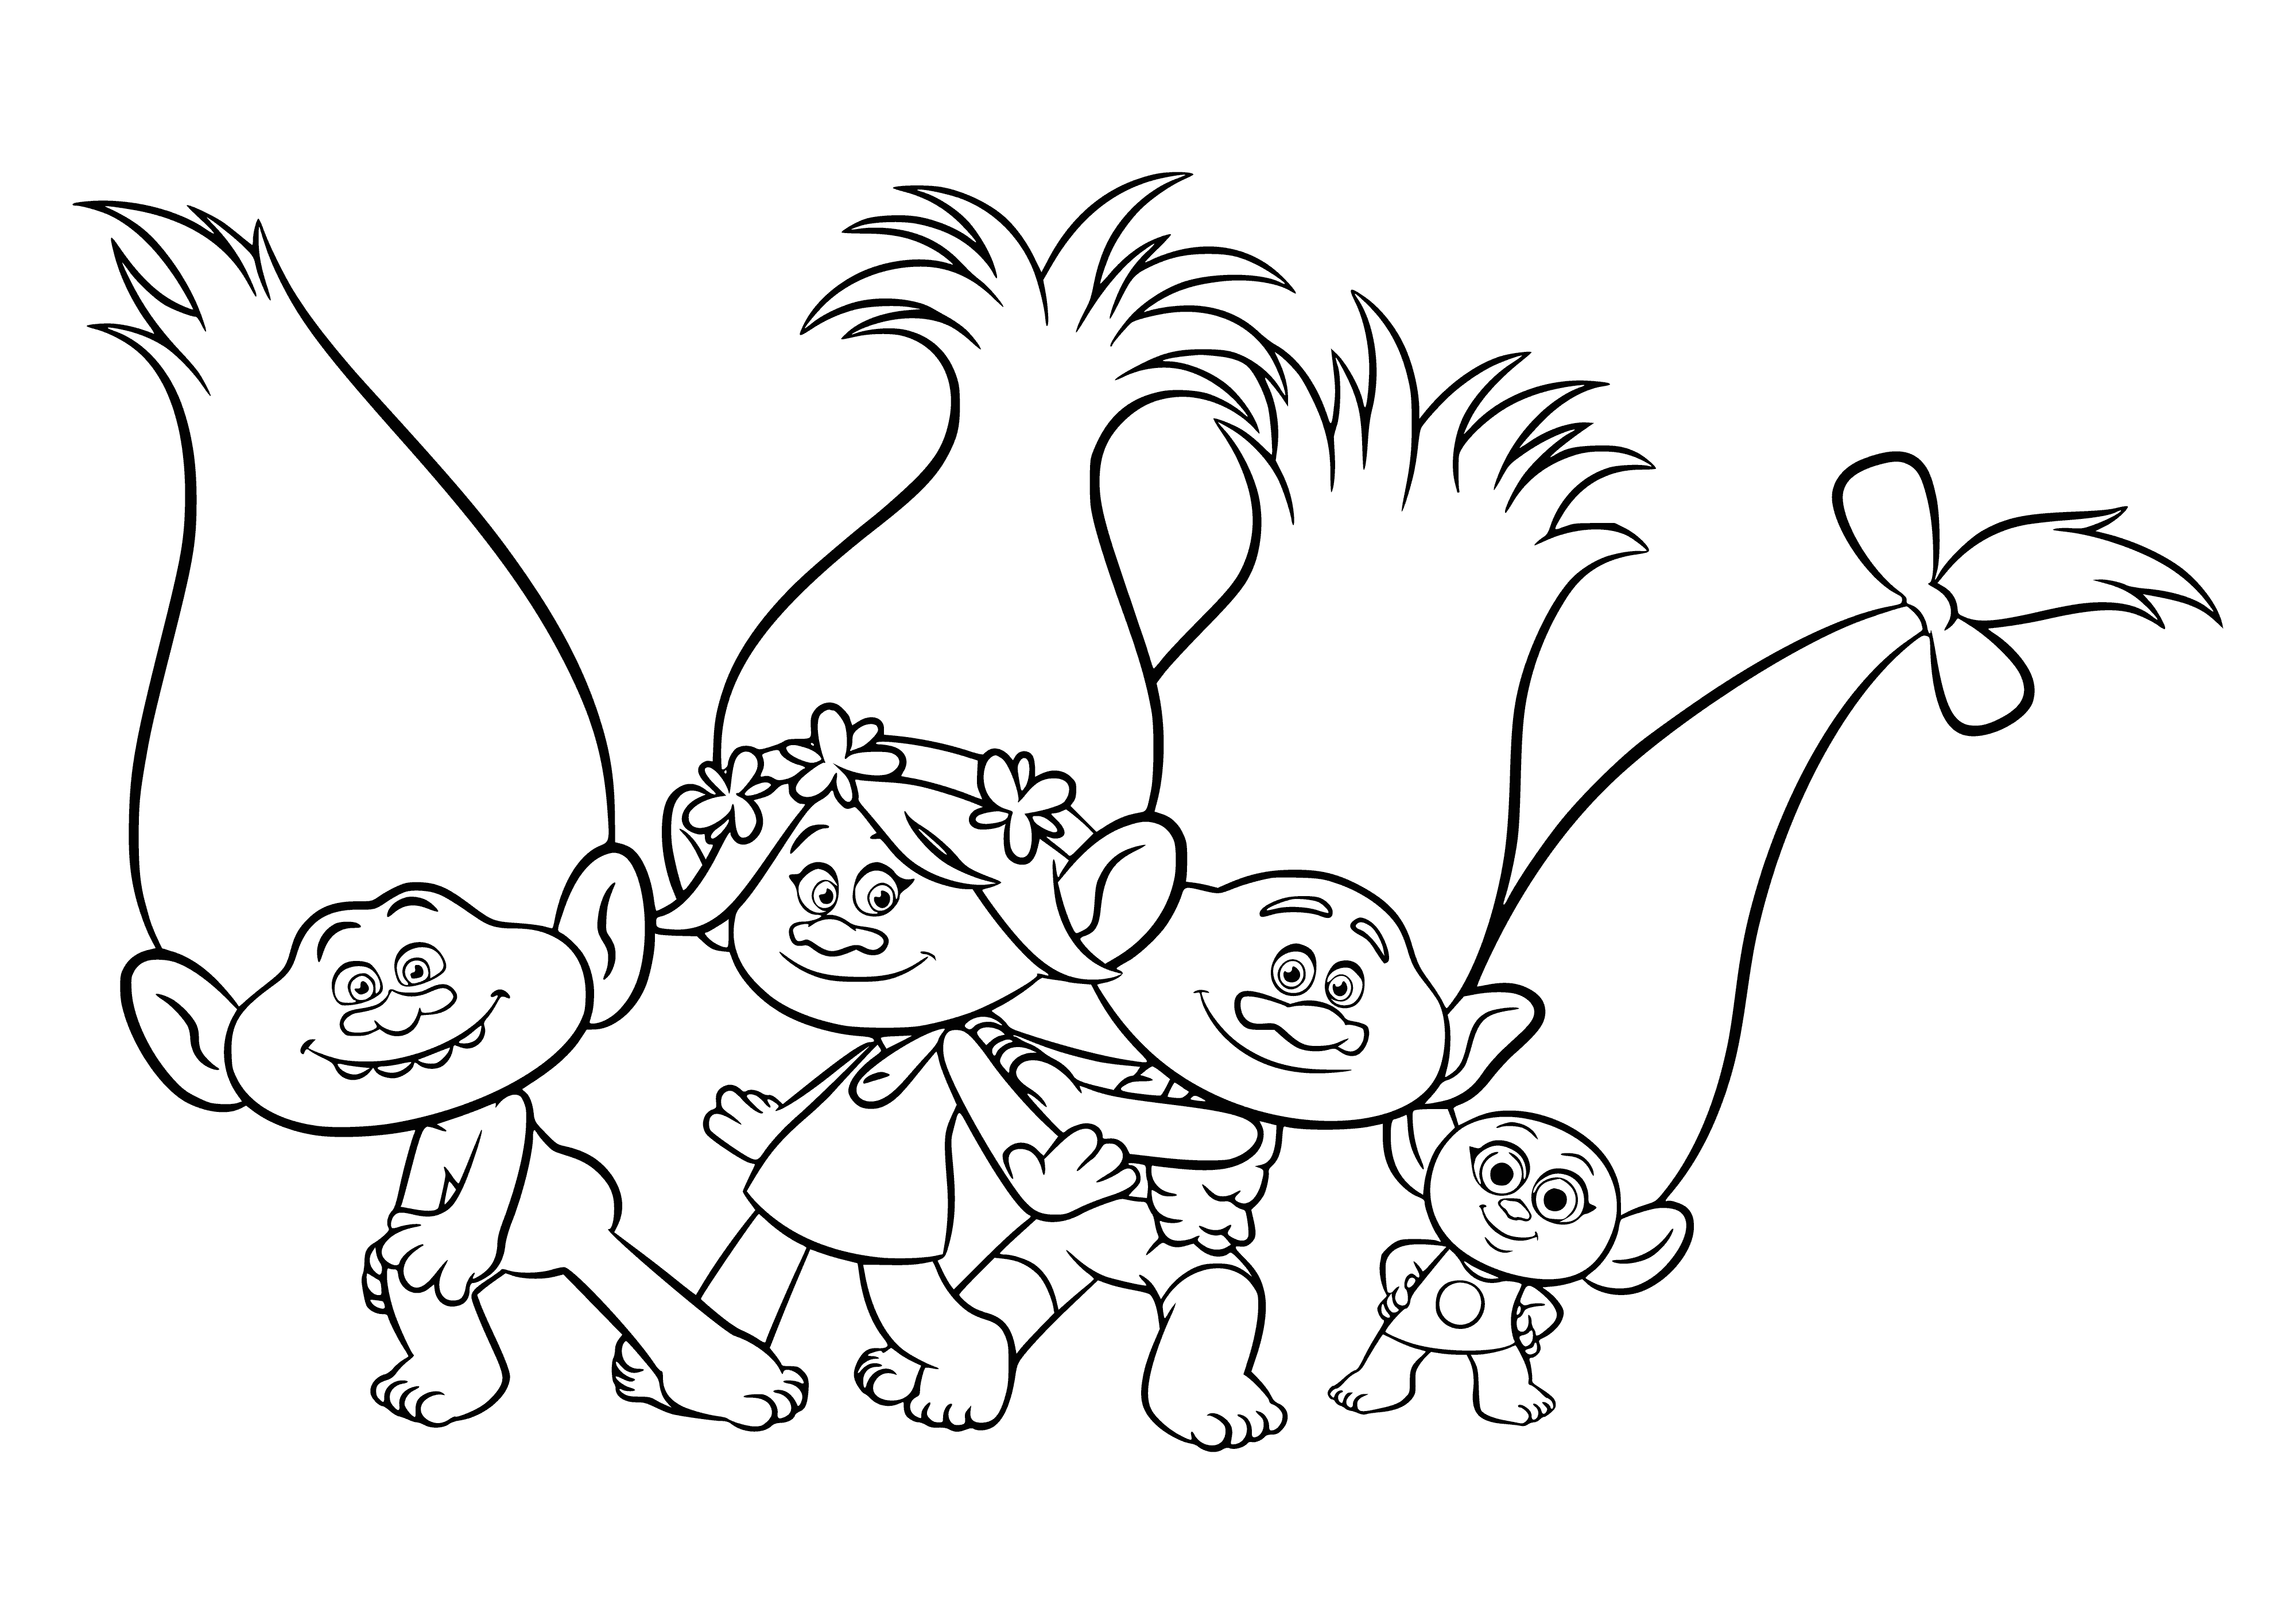 Funny trolls coloring page